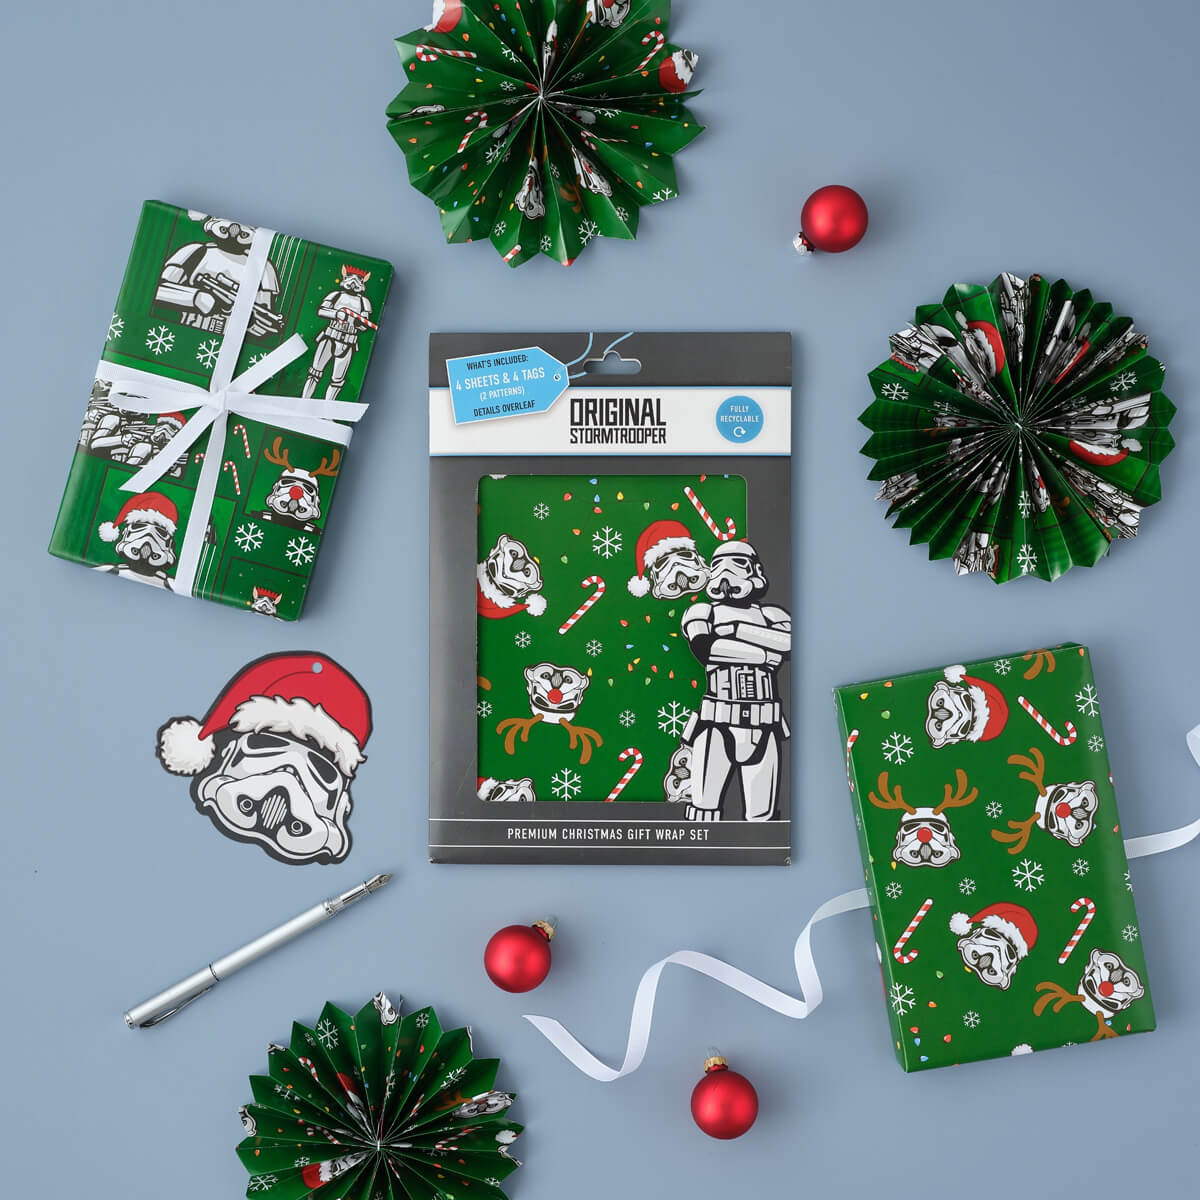 Original Stormtrooper Christmas Gift Wrap Pack of 4 - includes 4 sheets and 4 gift tags - close image of christmas wrapping paper